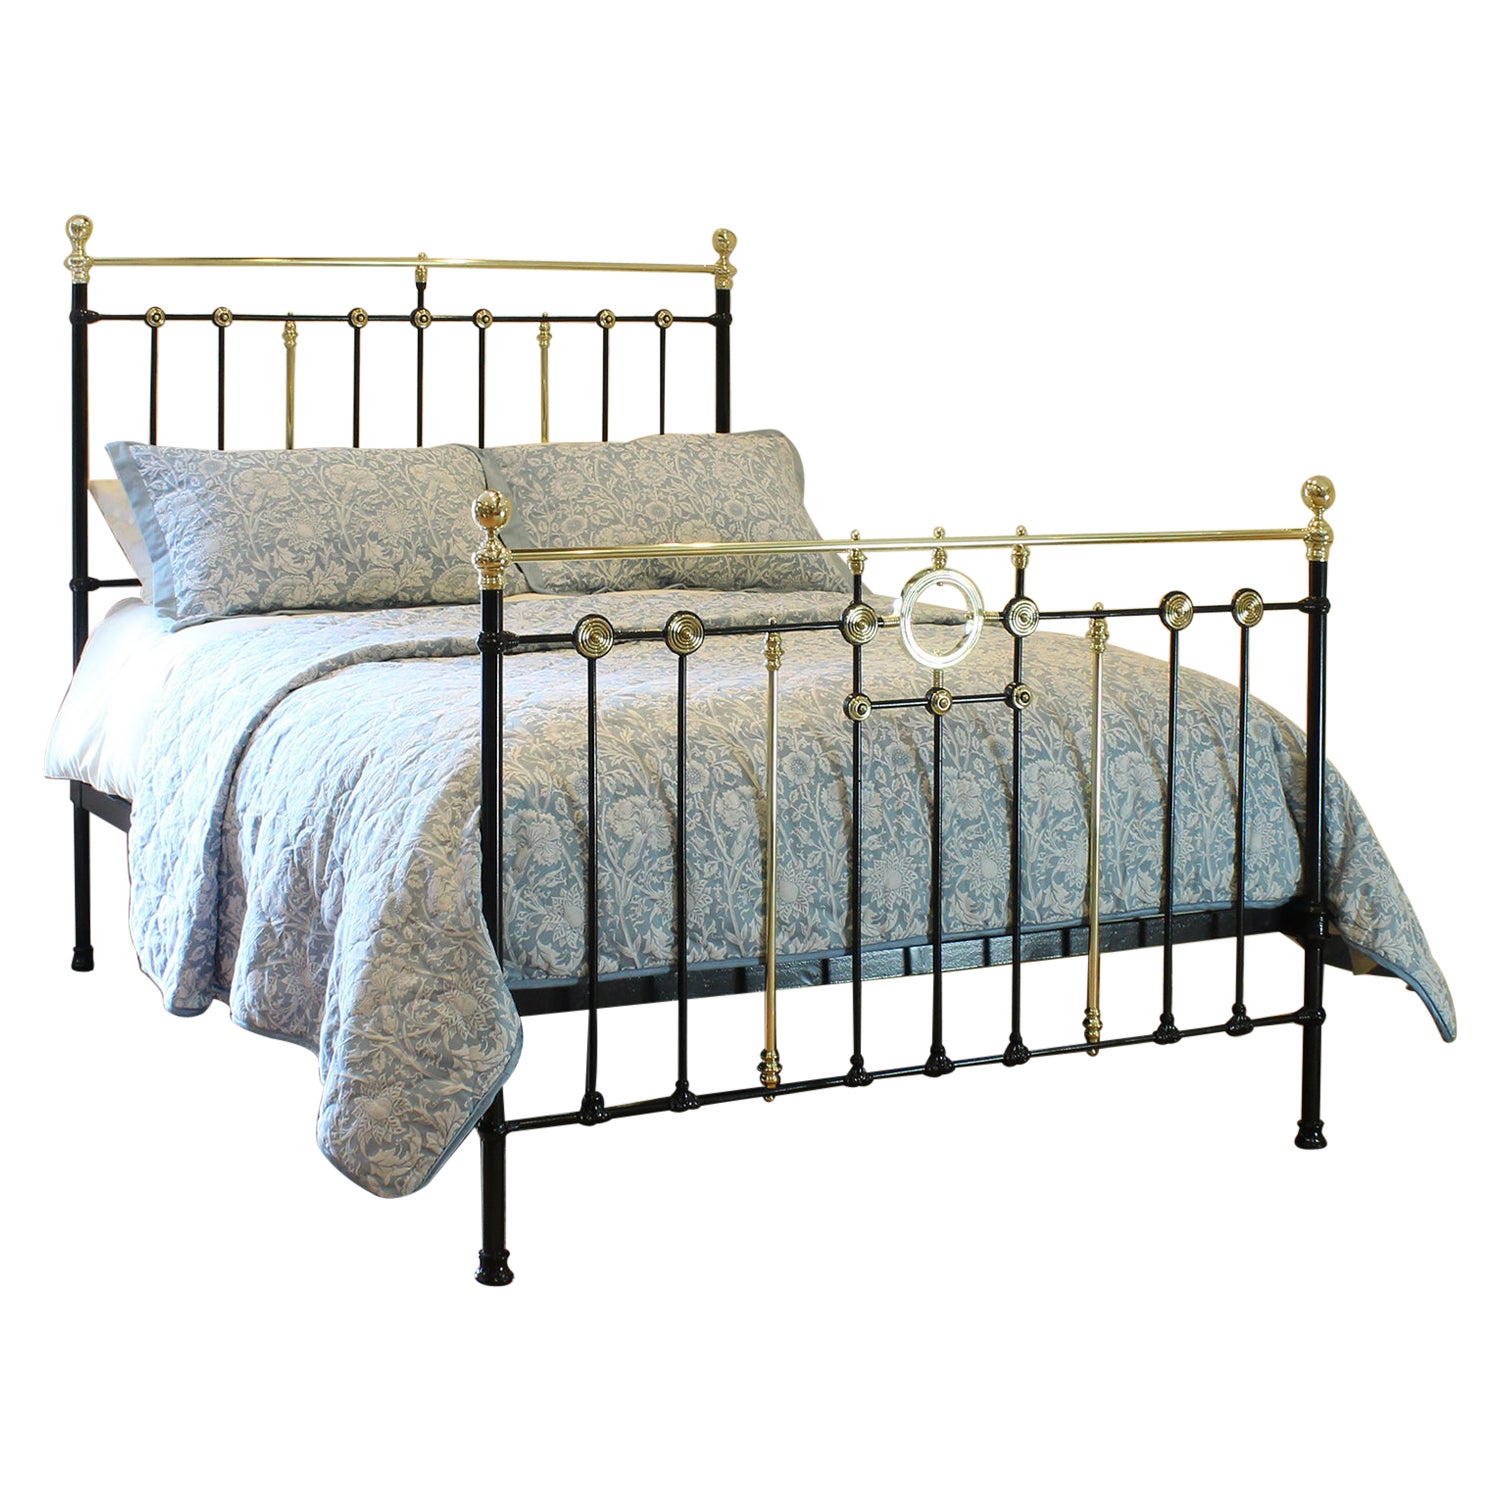 Brass and Iron Antique Bed in Black, MK279